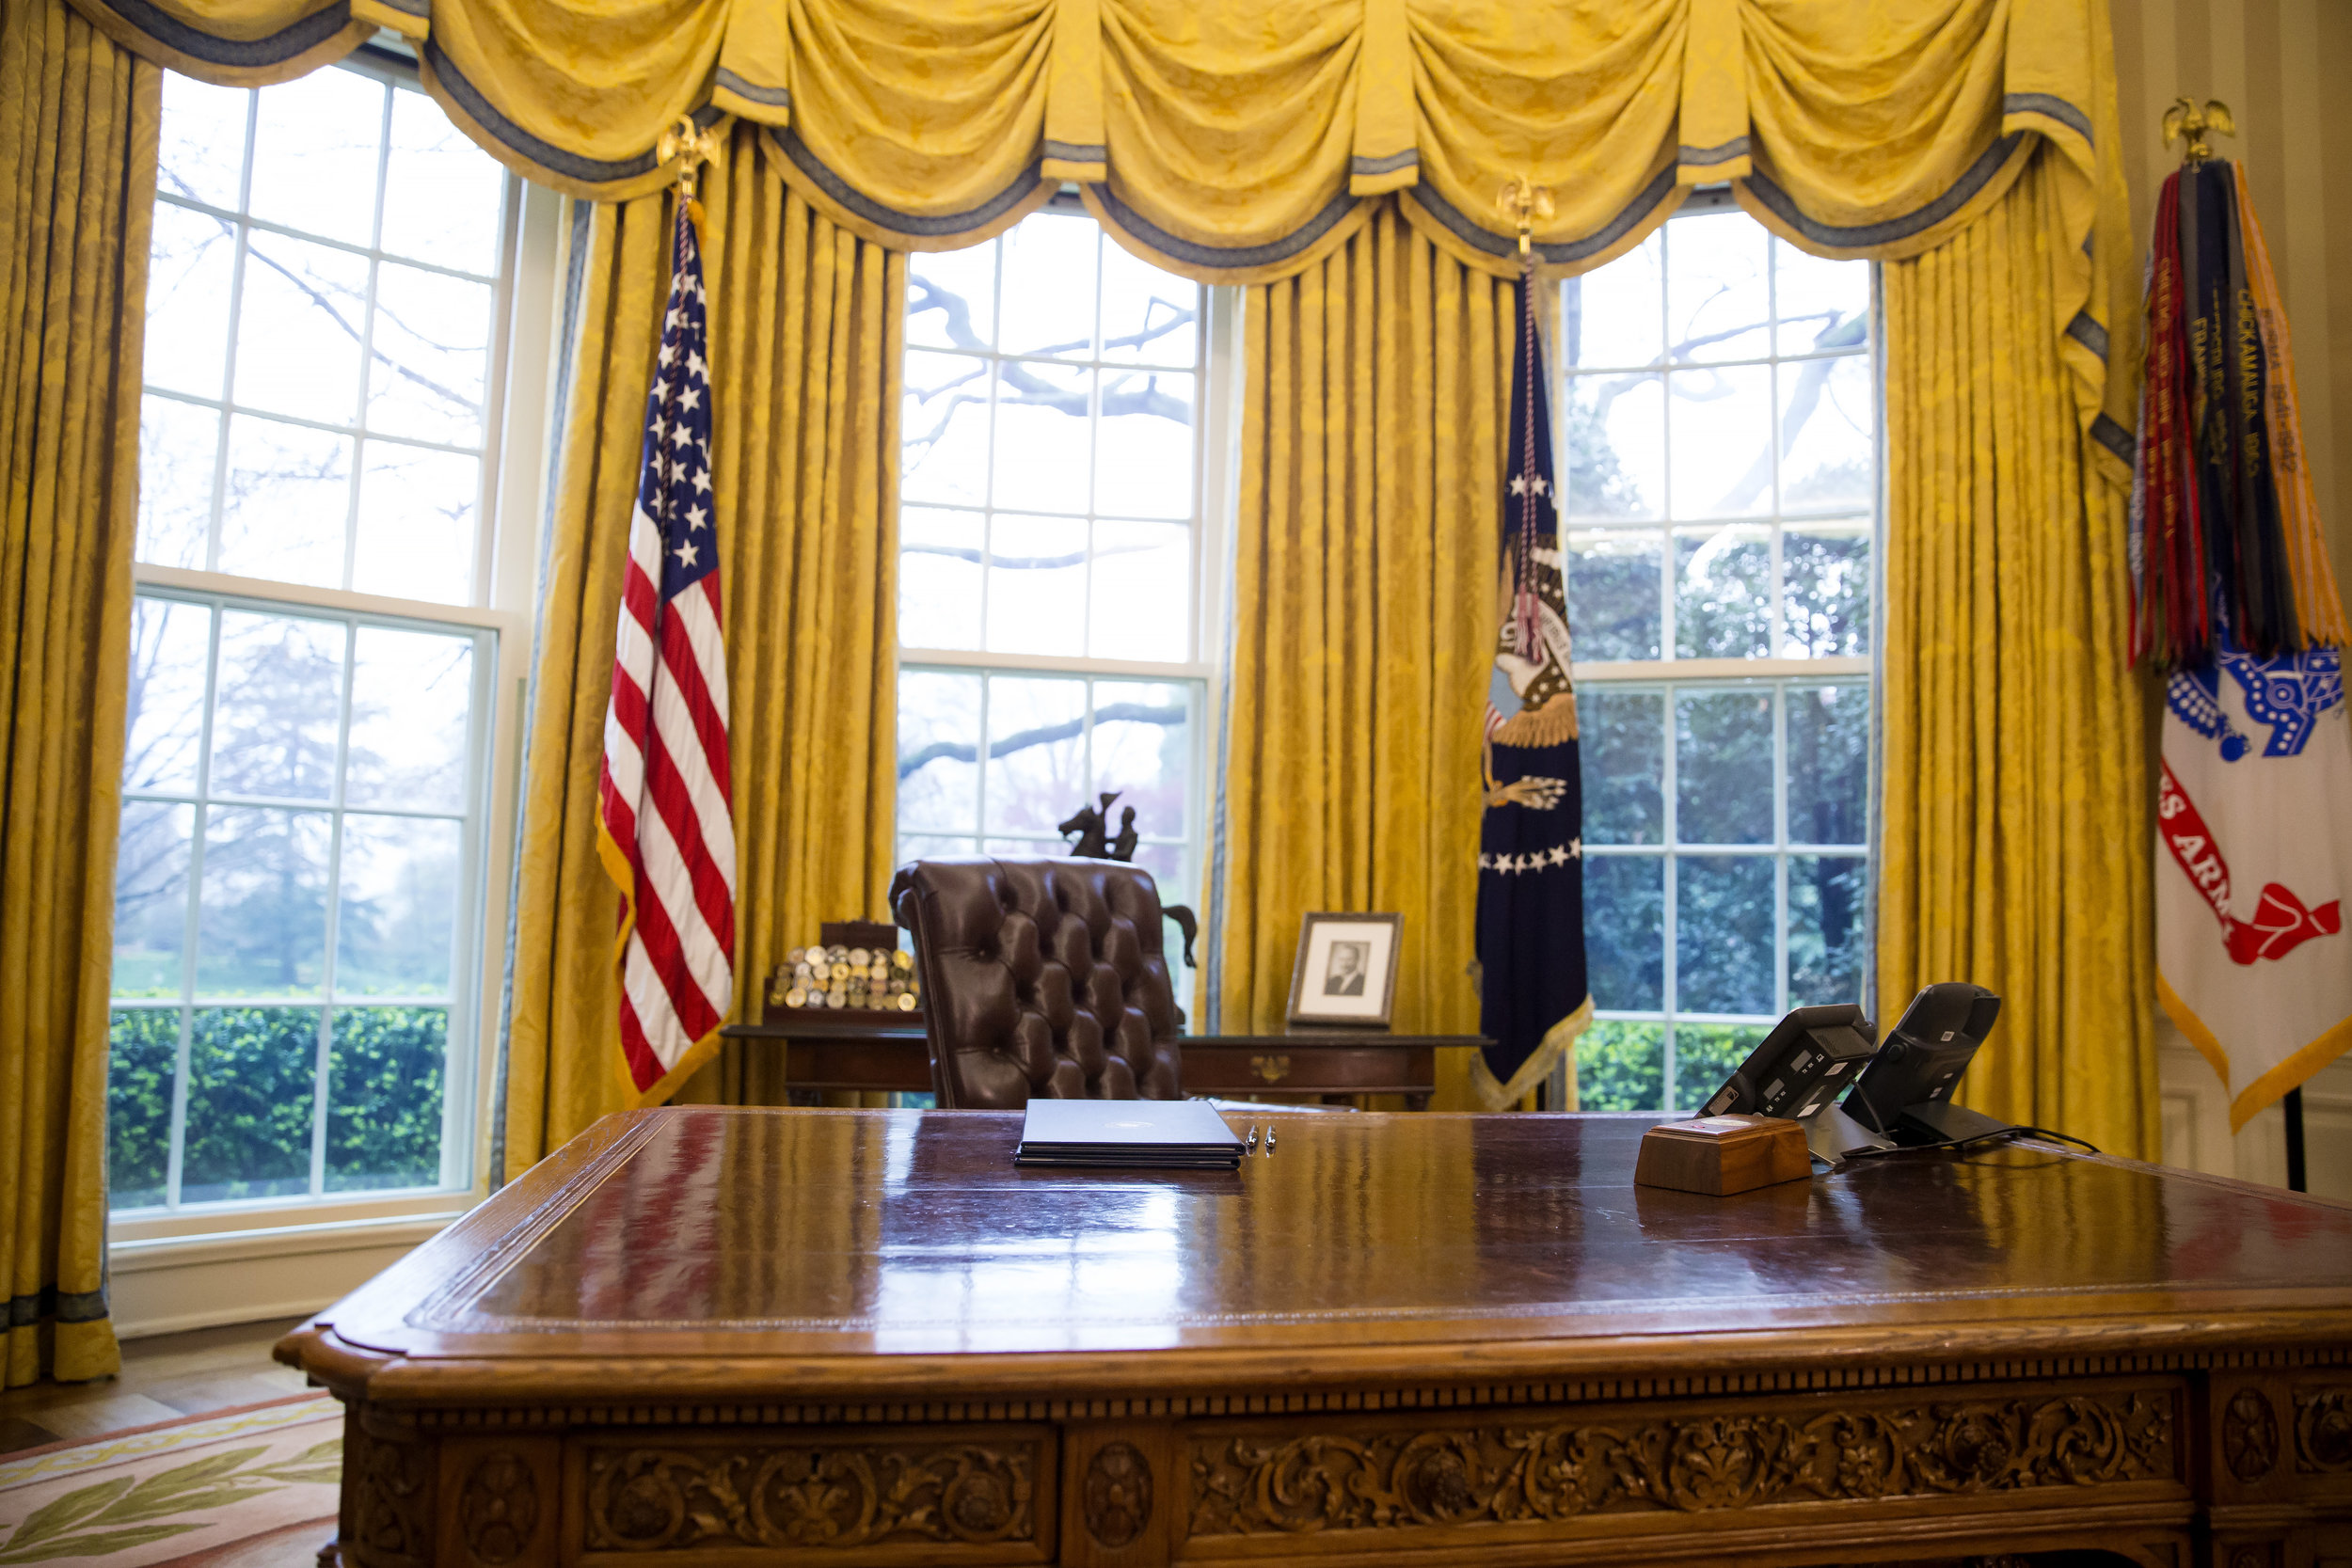   Resolute Desk, Oval Office of The White House. Washington DC. 2017  